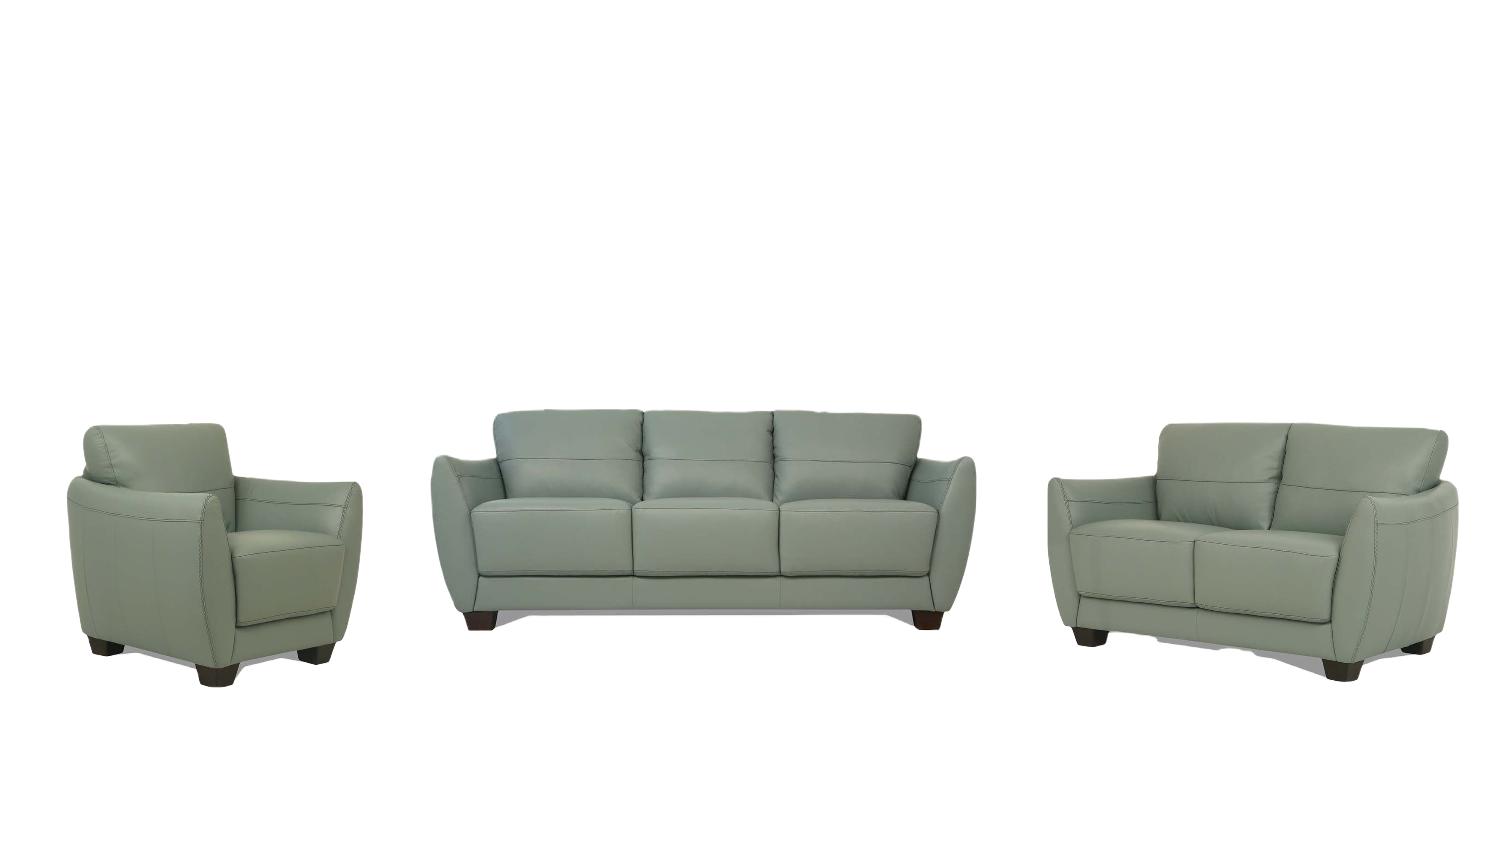 Modern, Transitional Sofa Loveseat and Chair Set Valeria 54950-3pcs in Spring green Leather